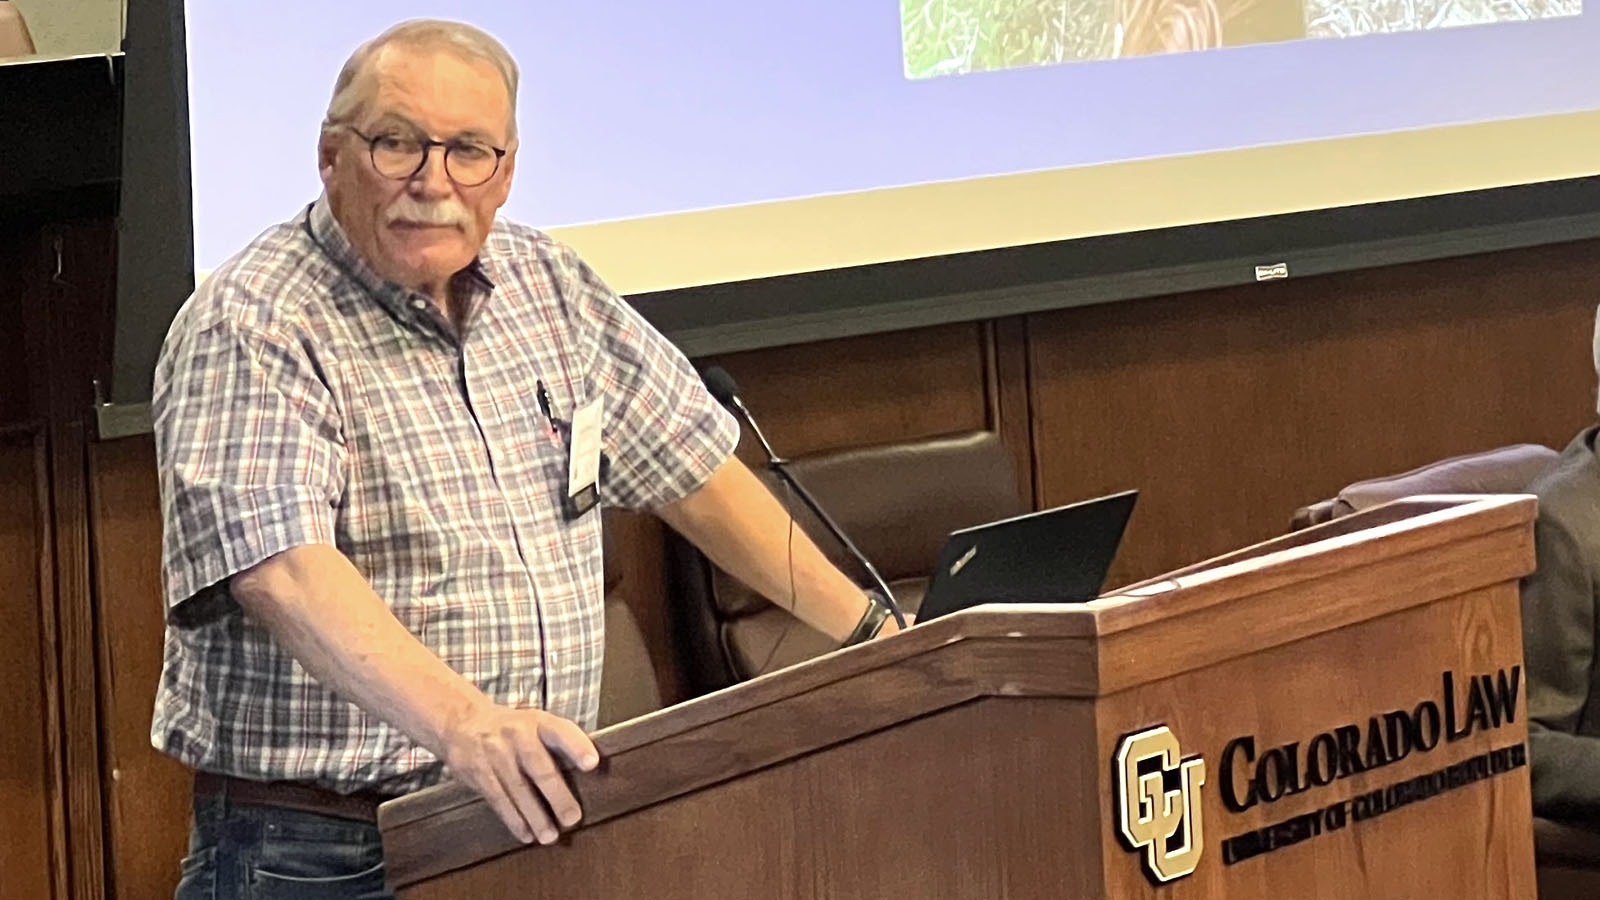 Wyoming Rancher and former legislator Pat O’Toole speaks on Friday during the “Crisis on the Colorado River” Conference in Boulder, Colorado.